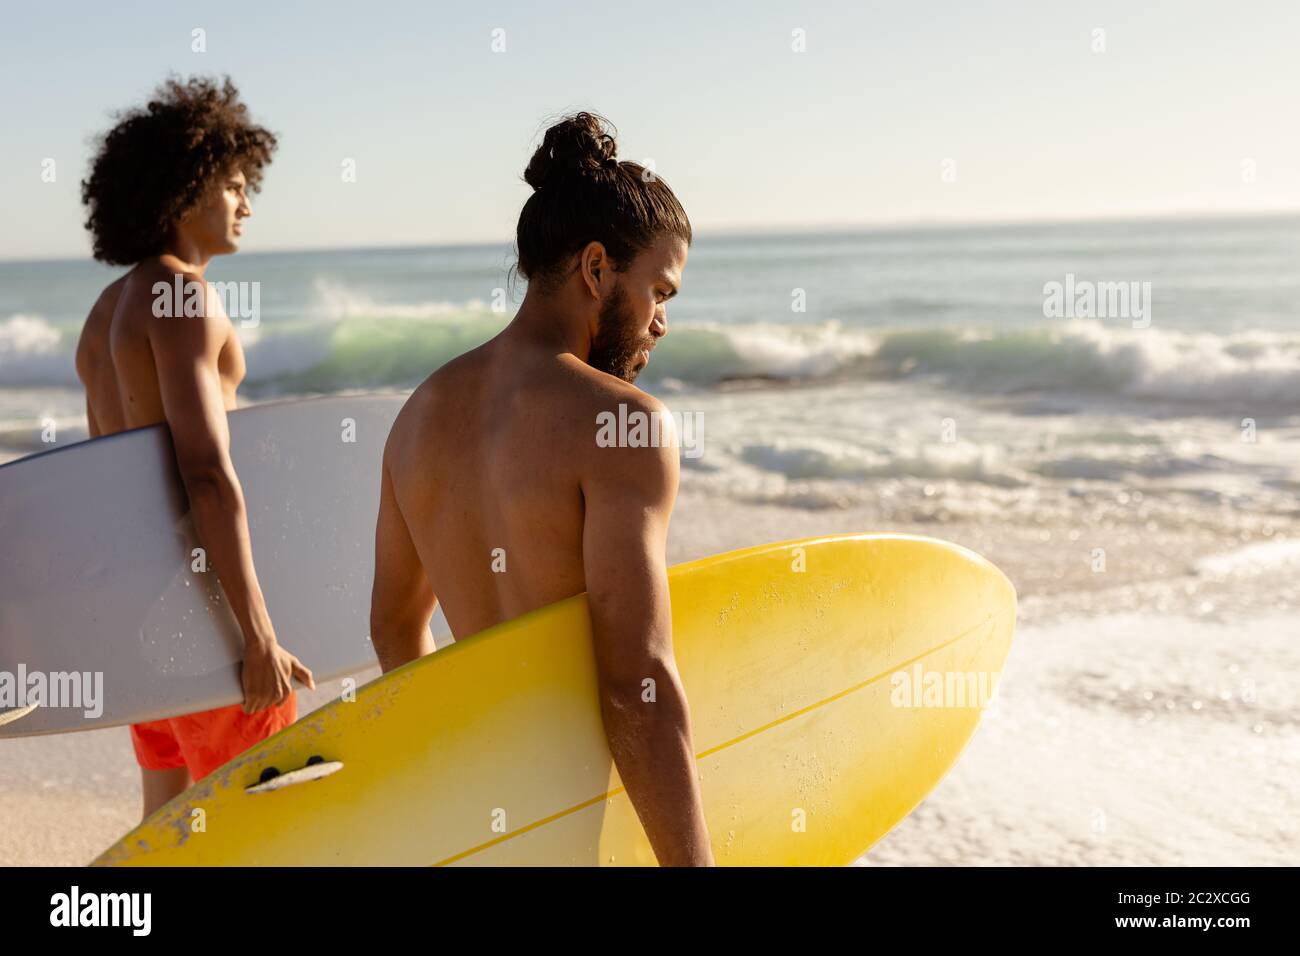 Multi-ethnic males holding surfboards on the beach Stock Photo